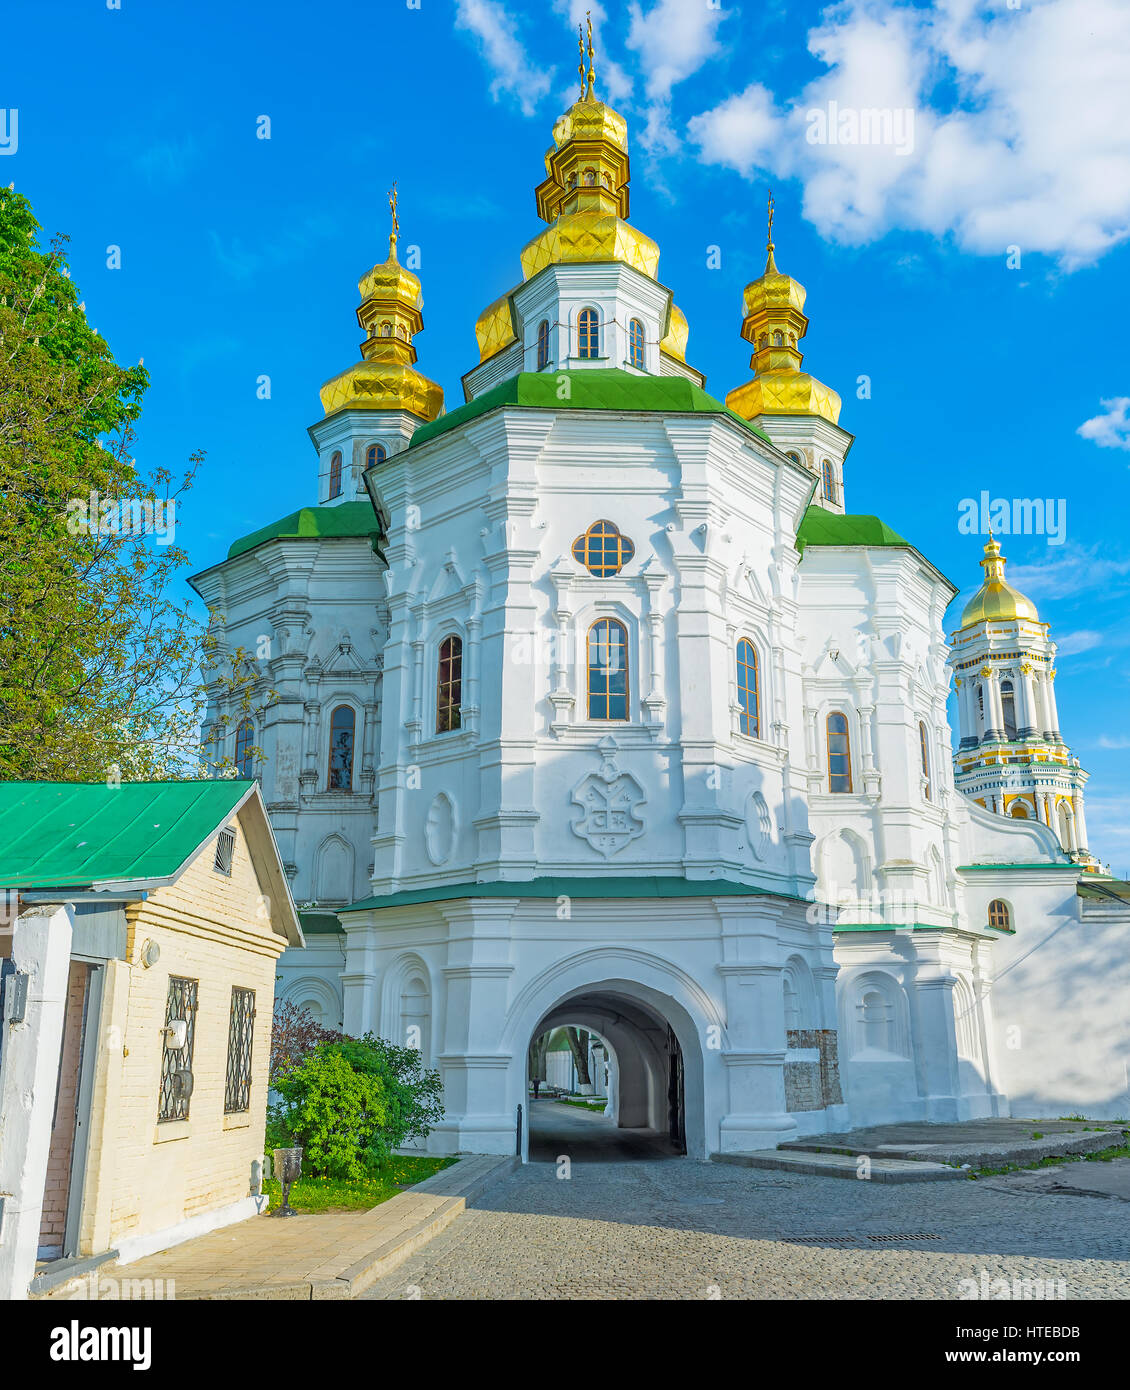 The All Saints Church with Economical Gates is a part of fortification complex of the Kiev Pechersk Lavra, Ukraine Stock Photo